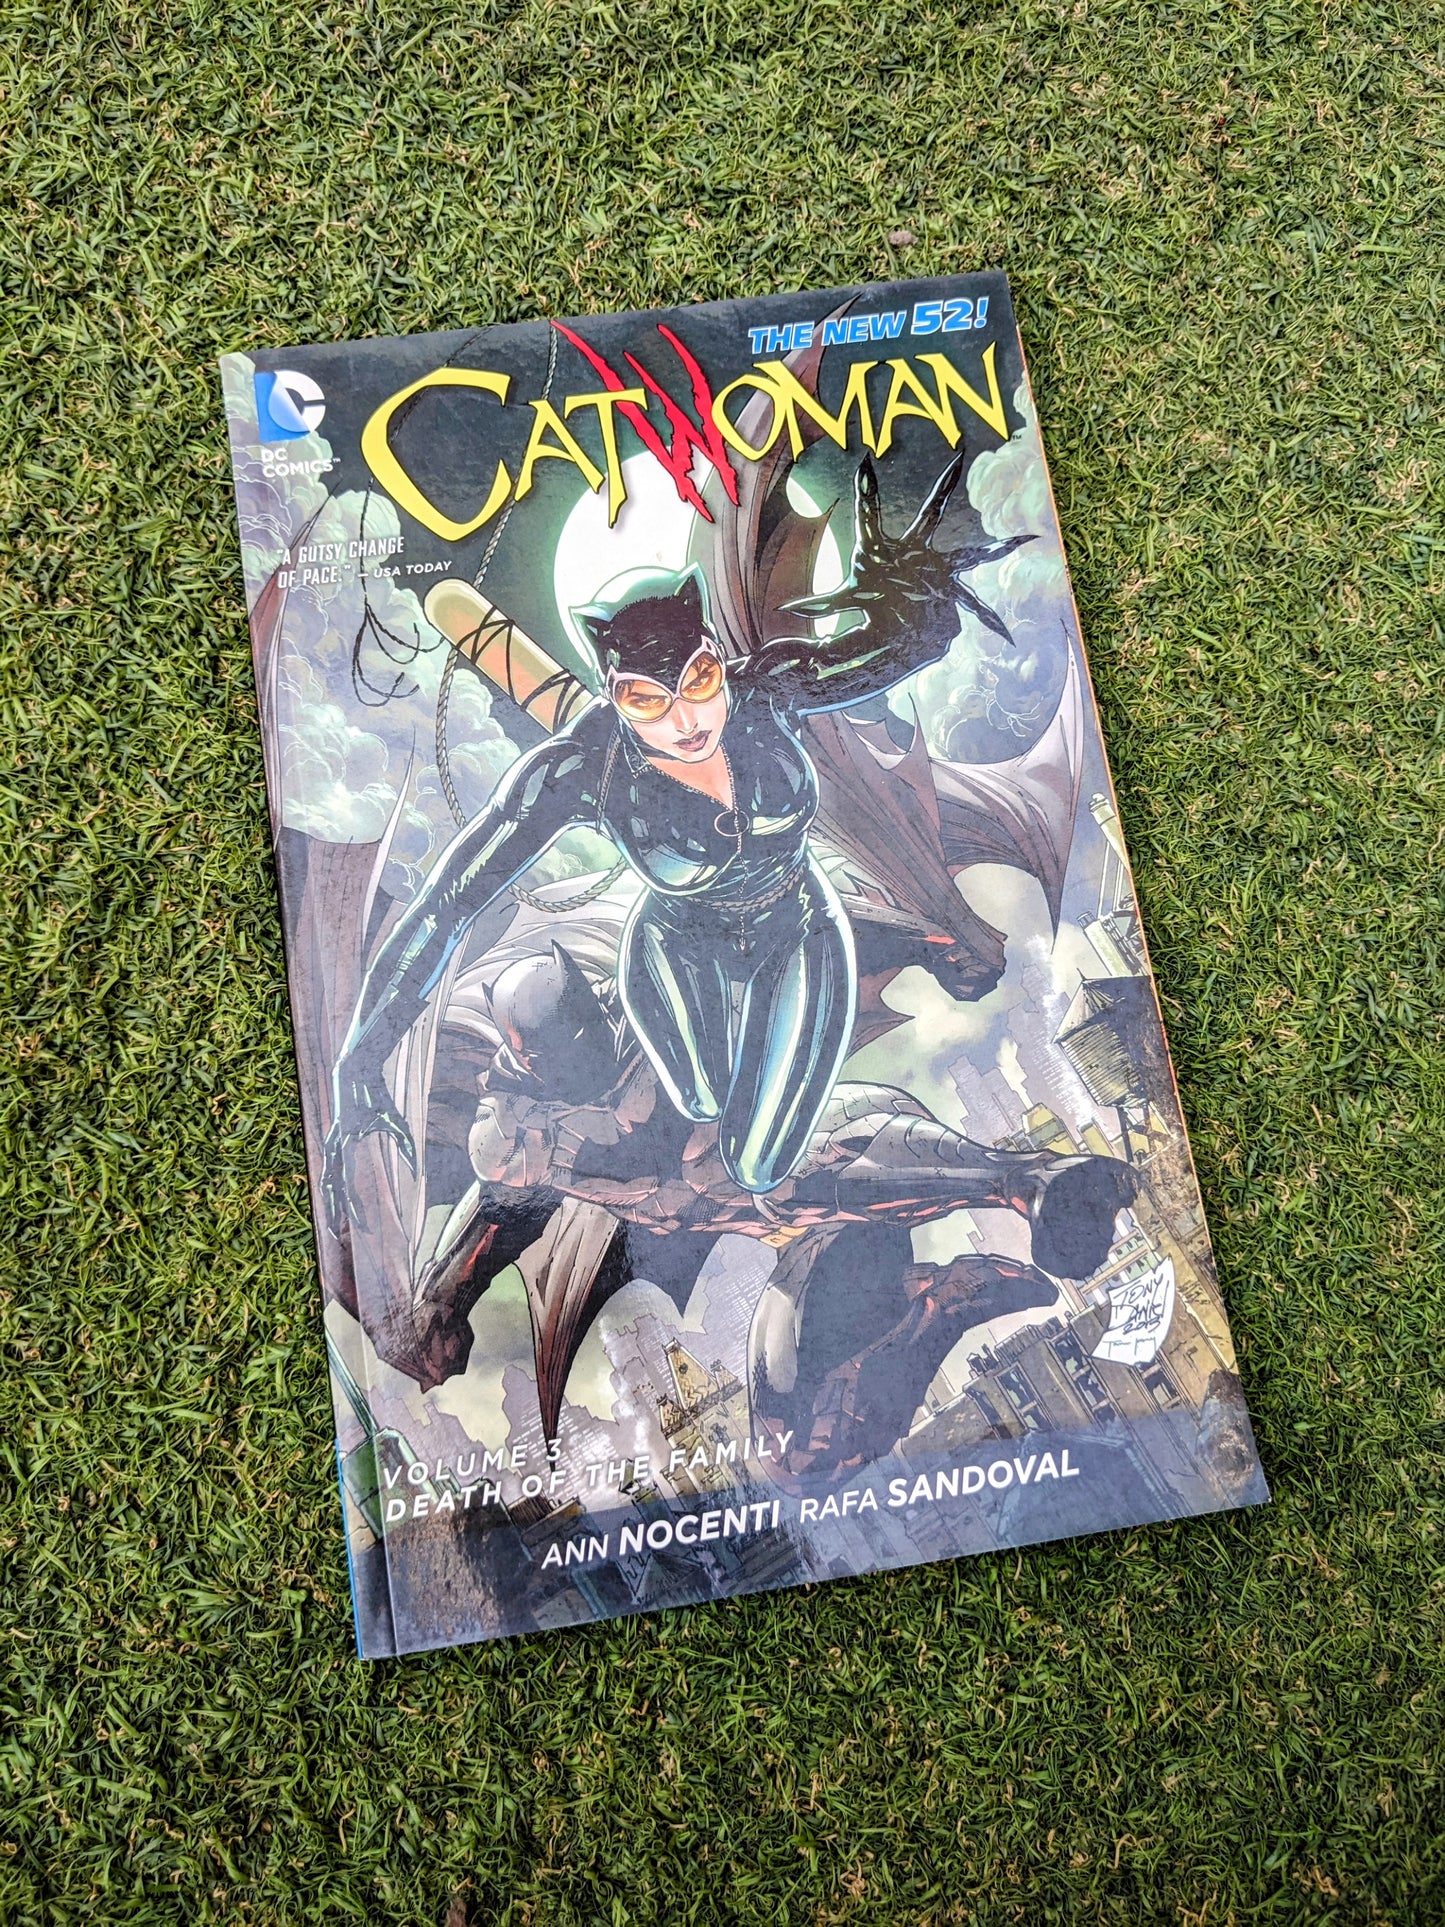 Catwoman: Death of the Family (Collected)